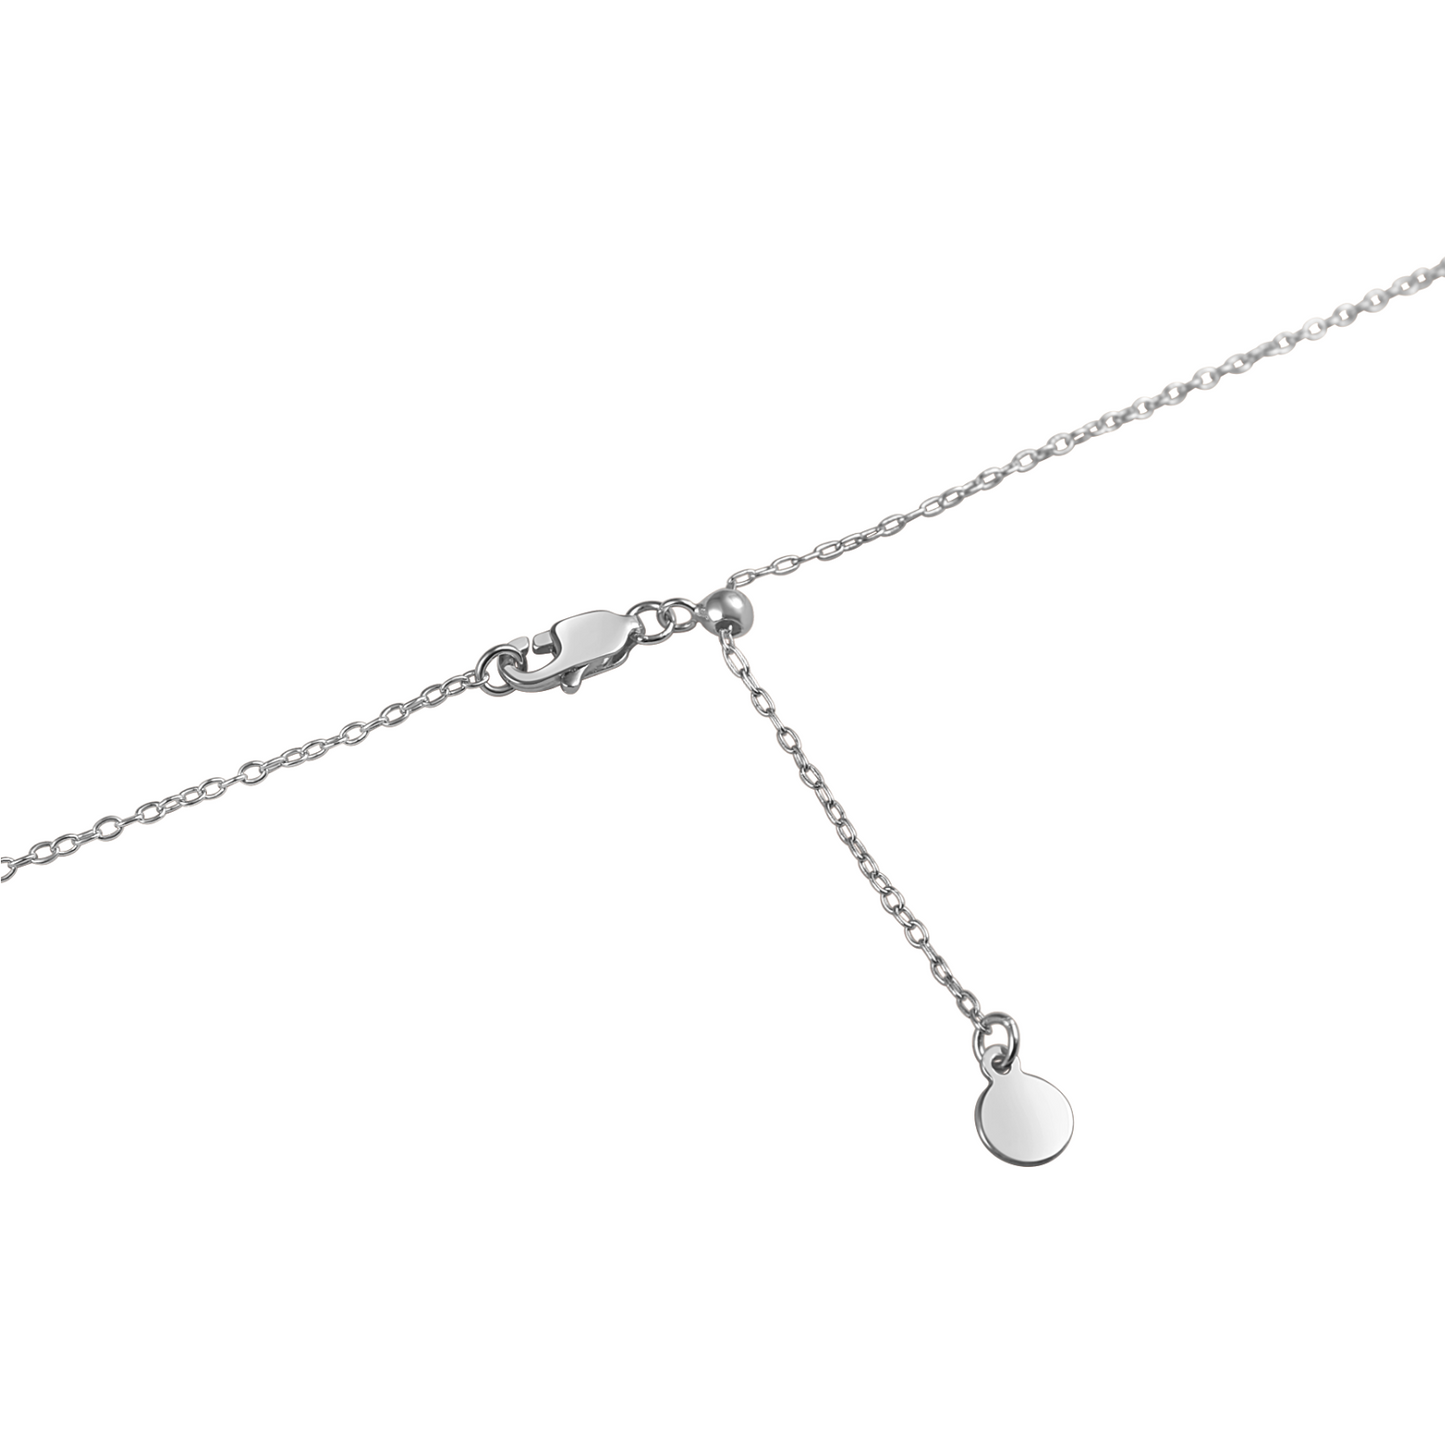 Silver Dainty Cable Chain